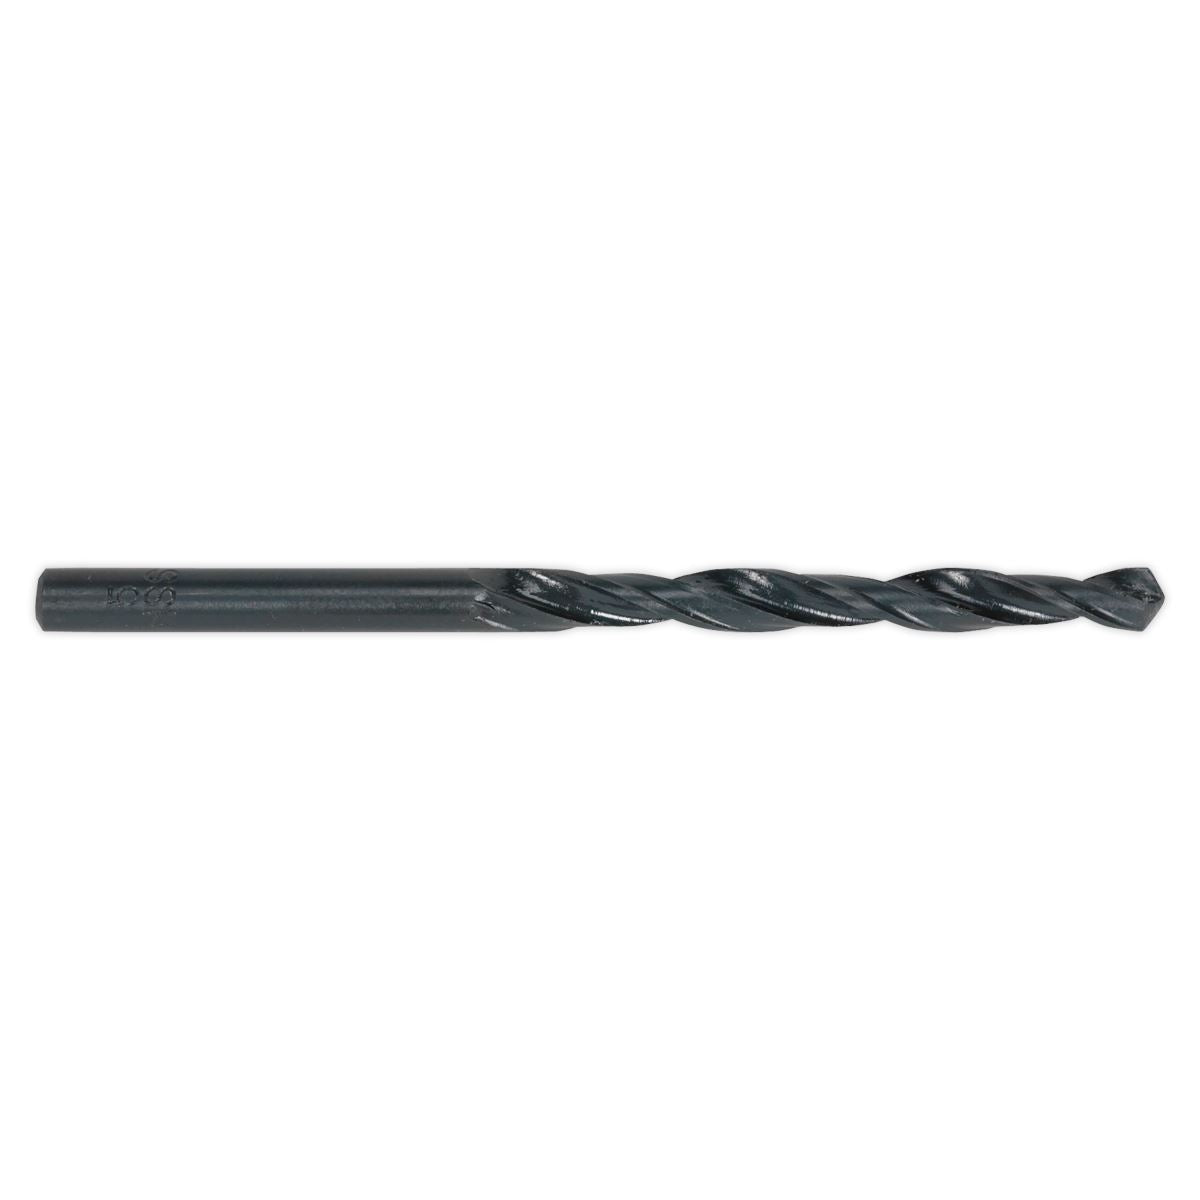 Sealey HSS Roll Forged Drill Bit Ø10mm Pack of 5